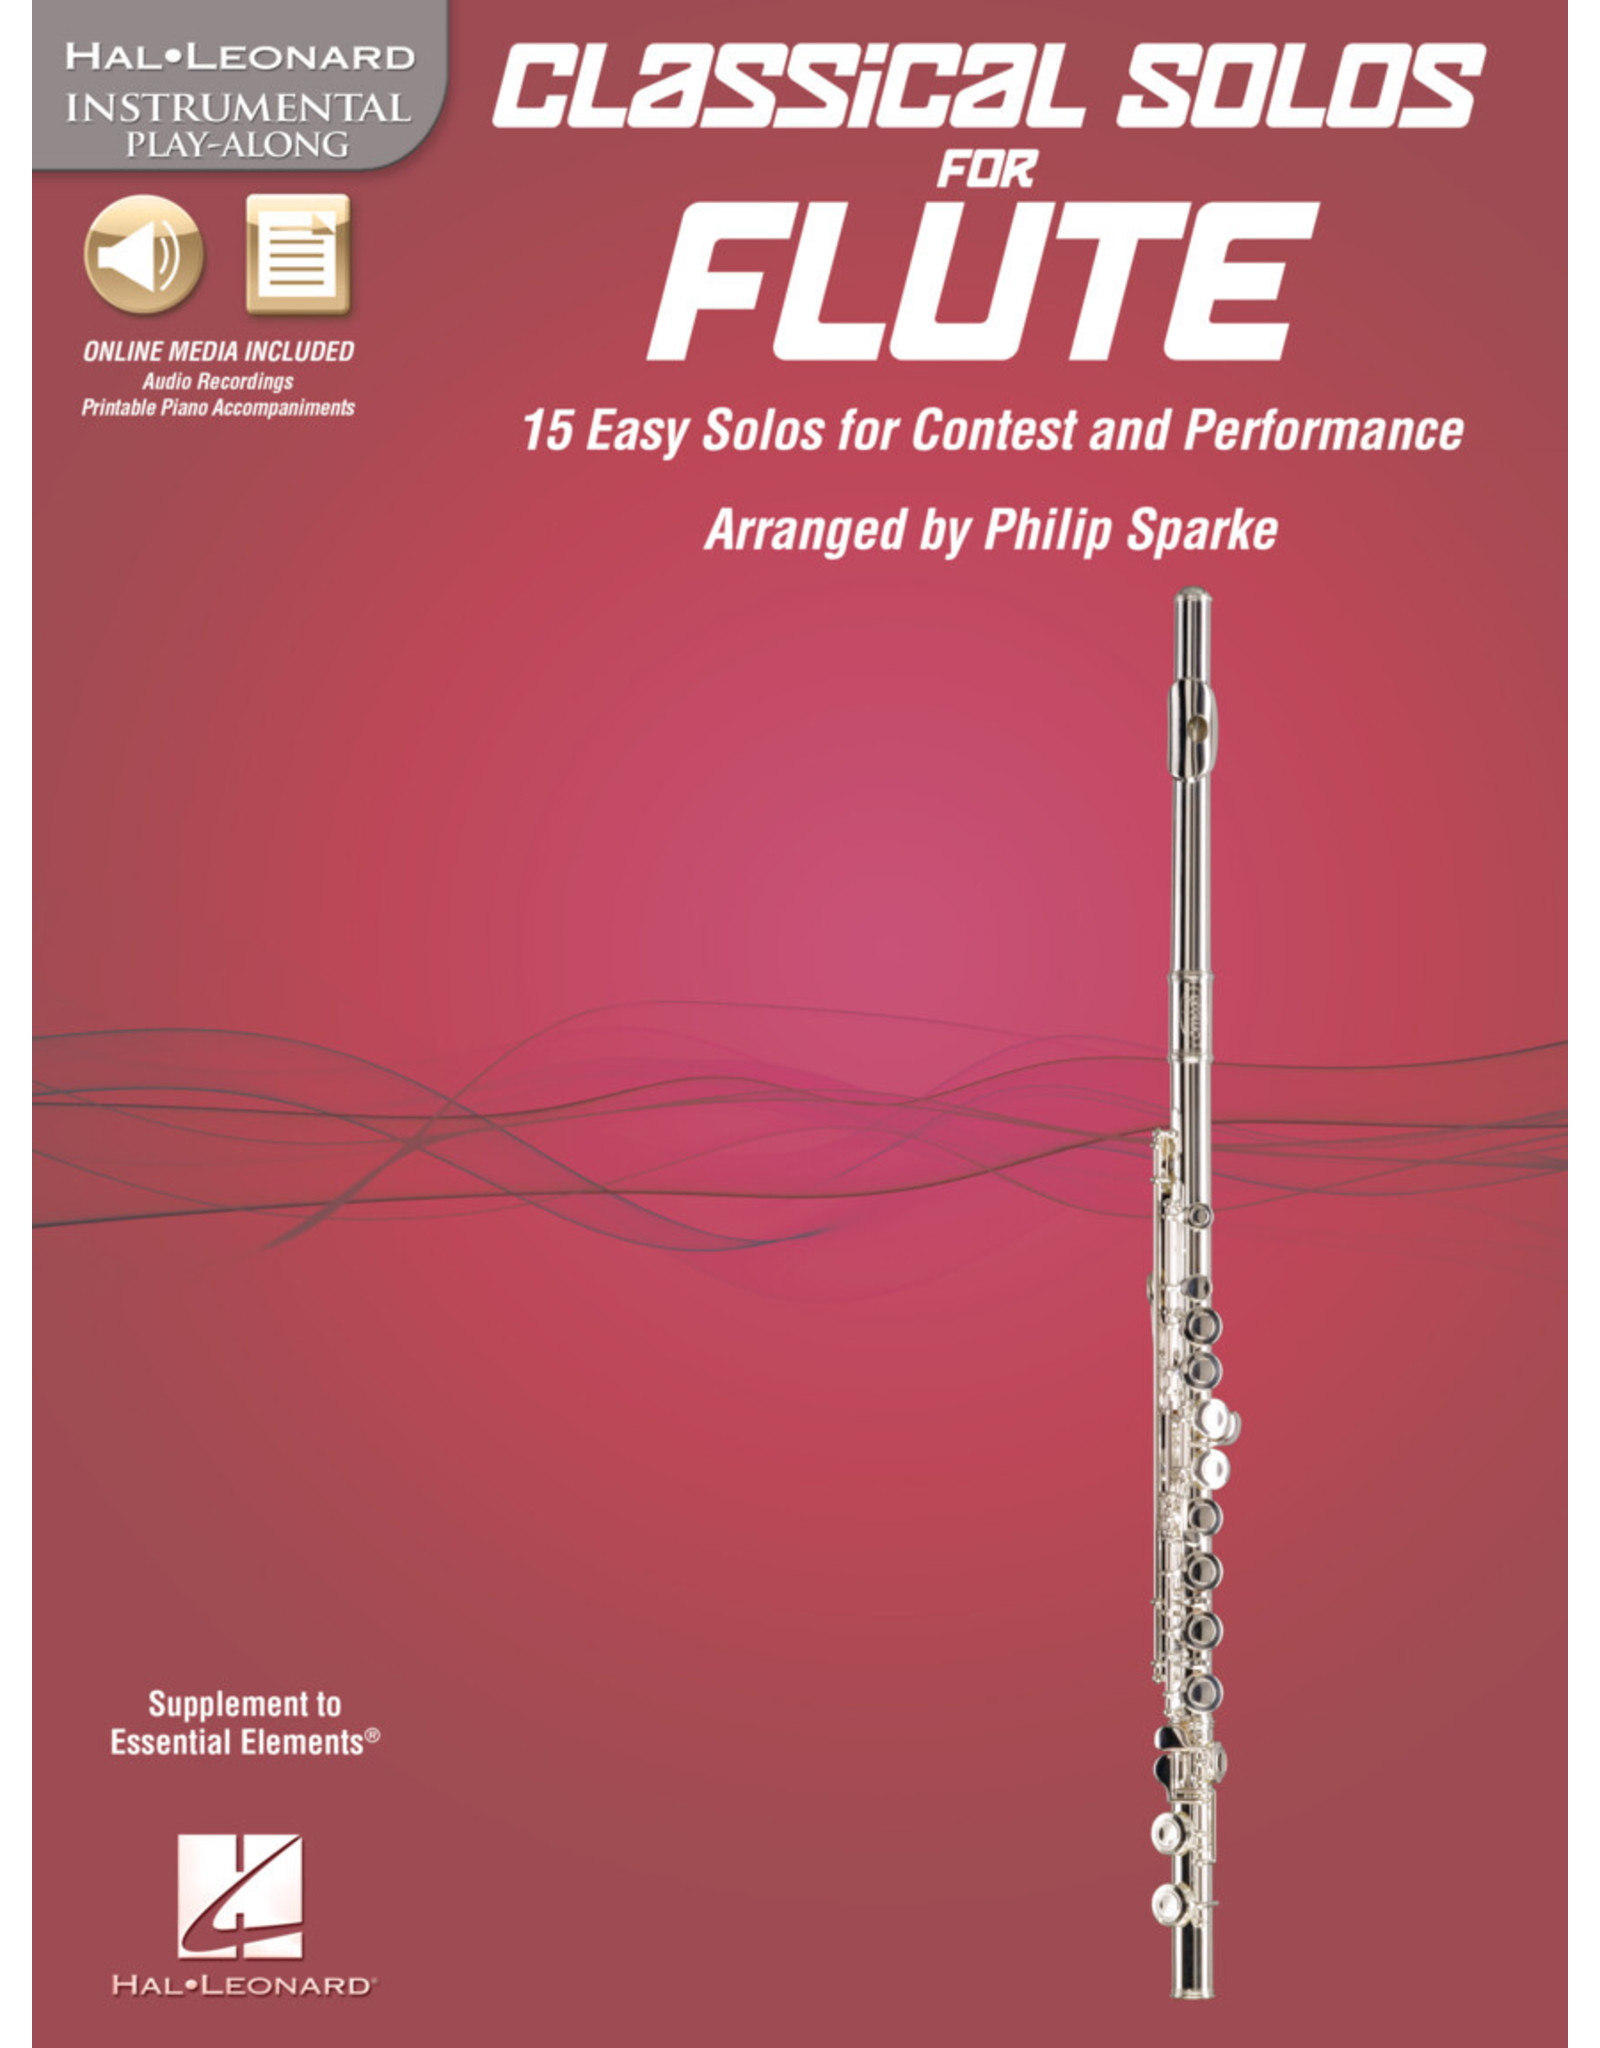 Hal Leonard Classical Solos for Flute 15 Easy Solos for Contest and Performance arr. Philip Sparke Book/CD Packs Instrumental Play-Along